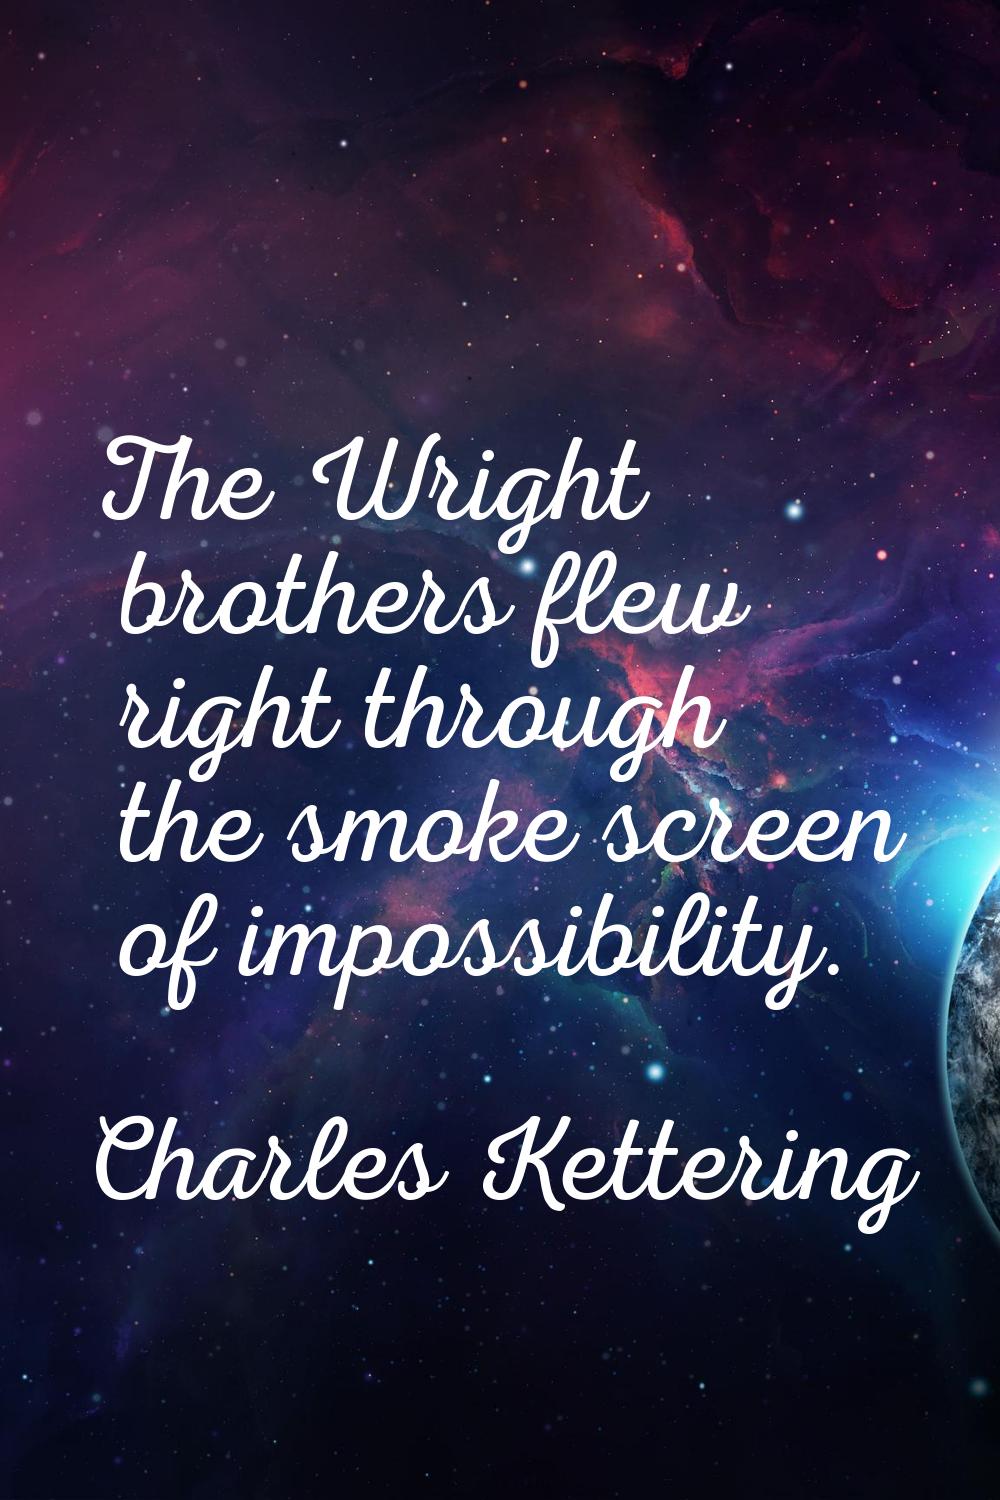 The Wright brothers flew right through the smoke screen of impossibility.